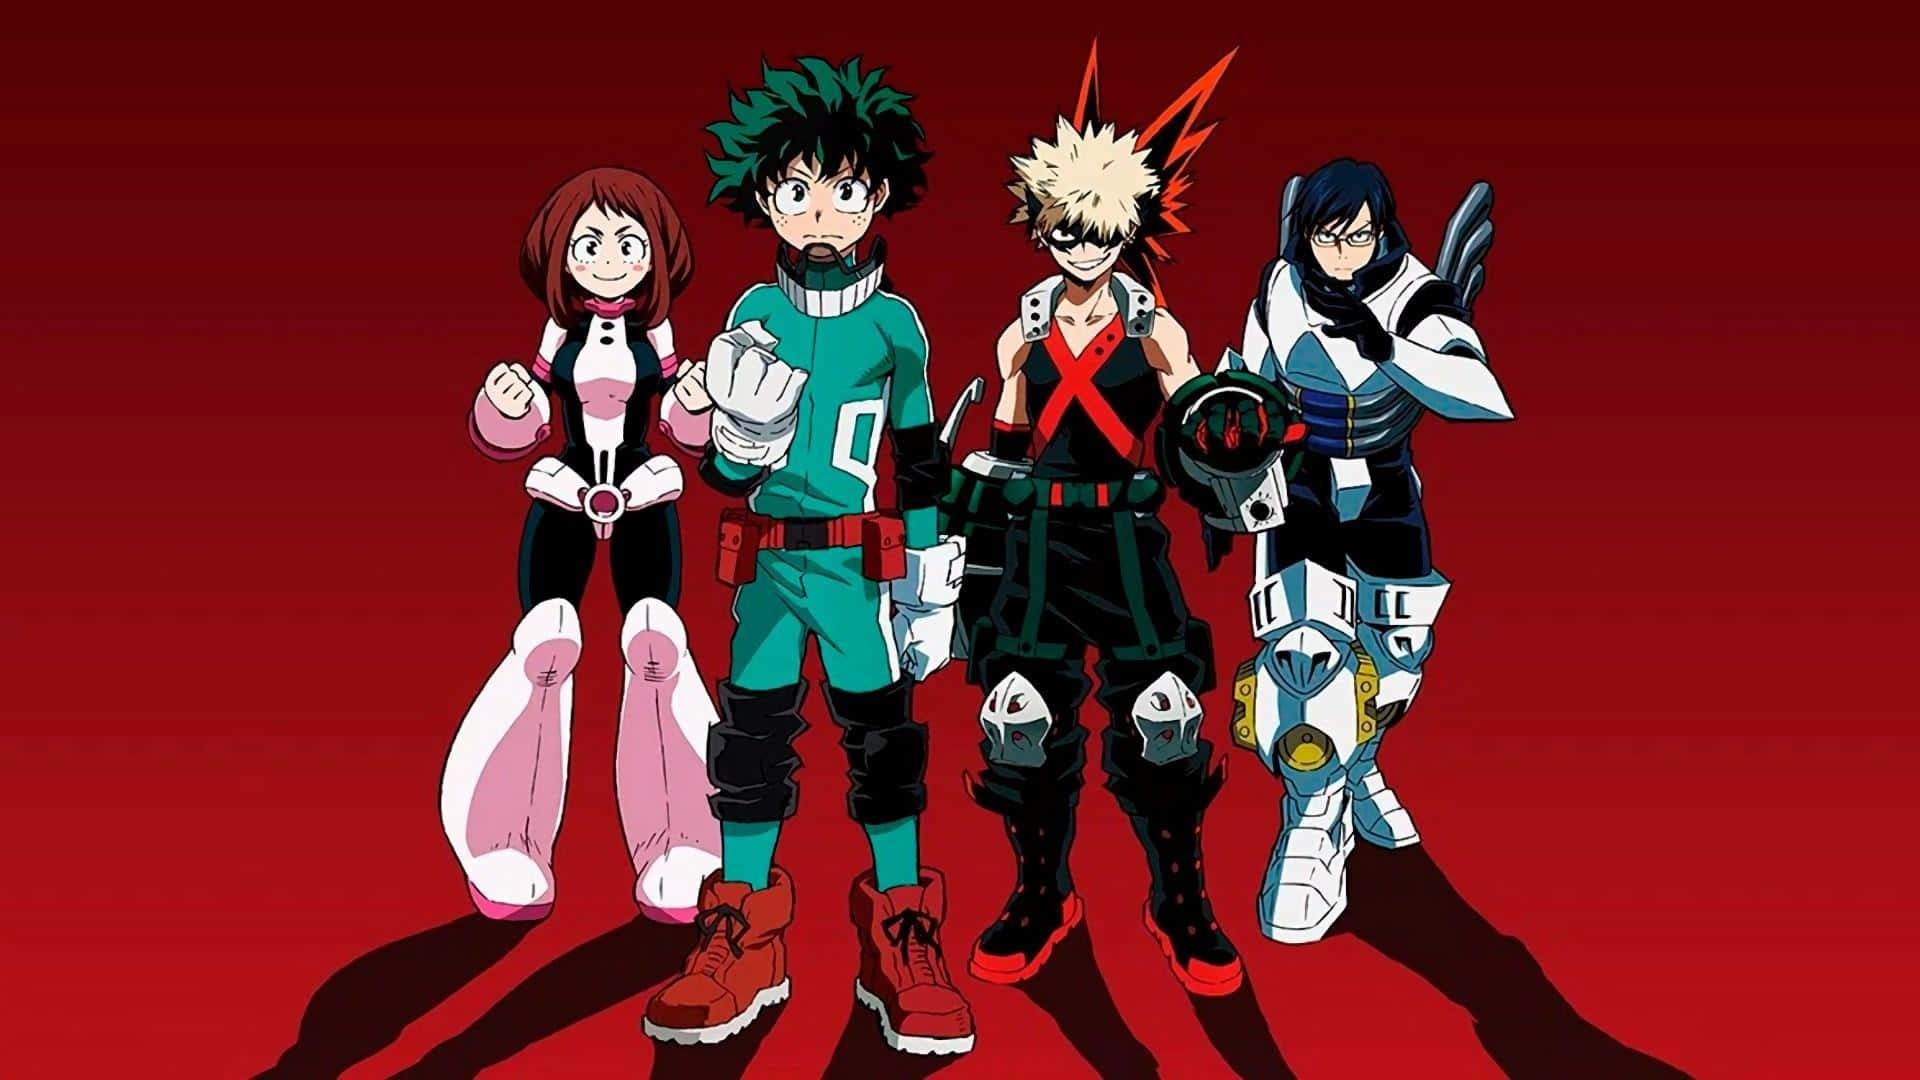 Get ready for an epic adventure with My Hero Academia on your laptop. Wallpaper